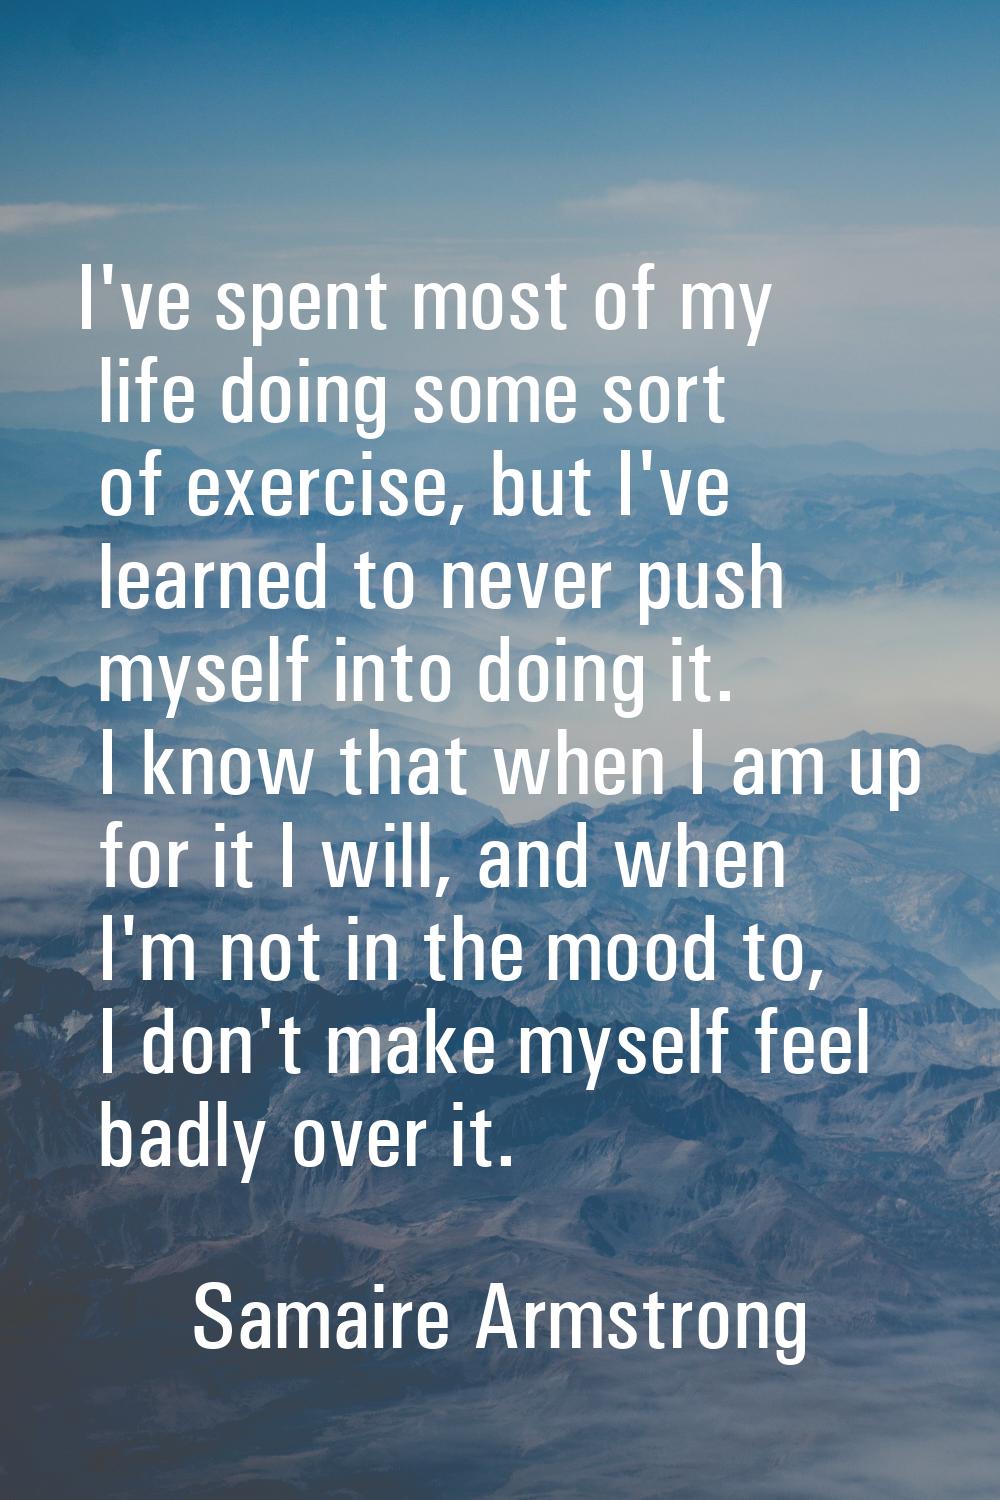 I've spent most of my life doing some sort of exercise, but I've learned to never push myself into 